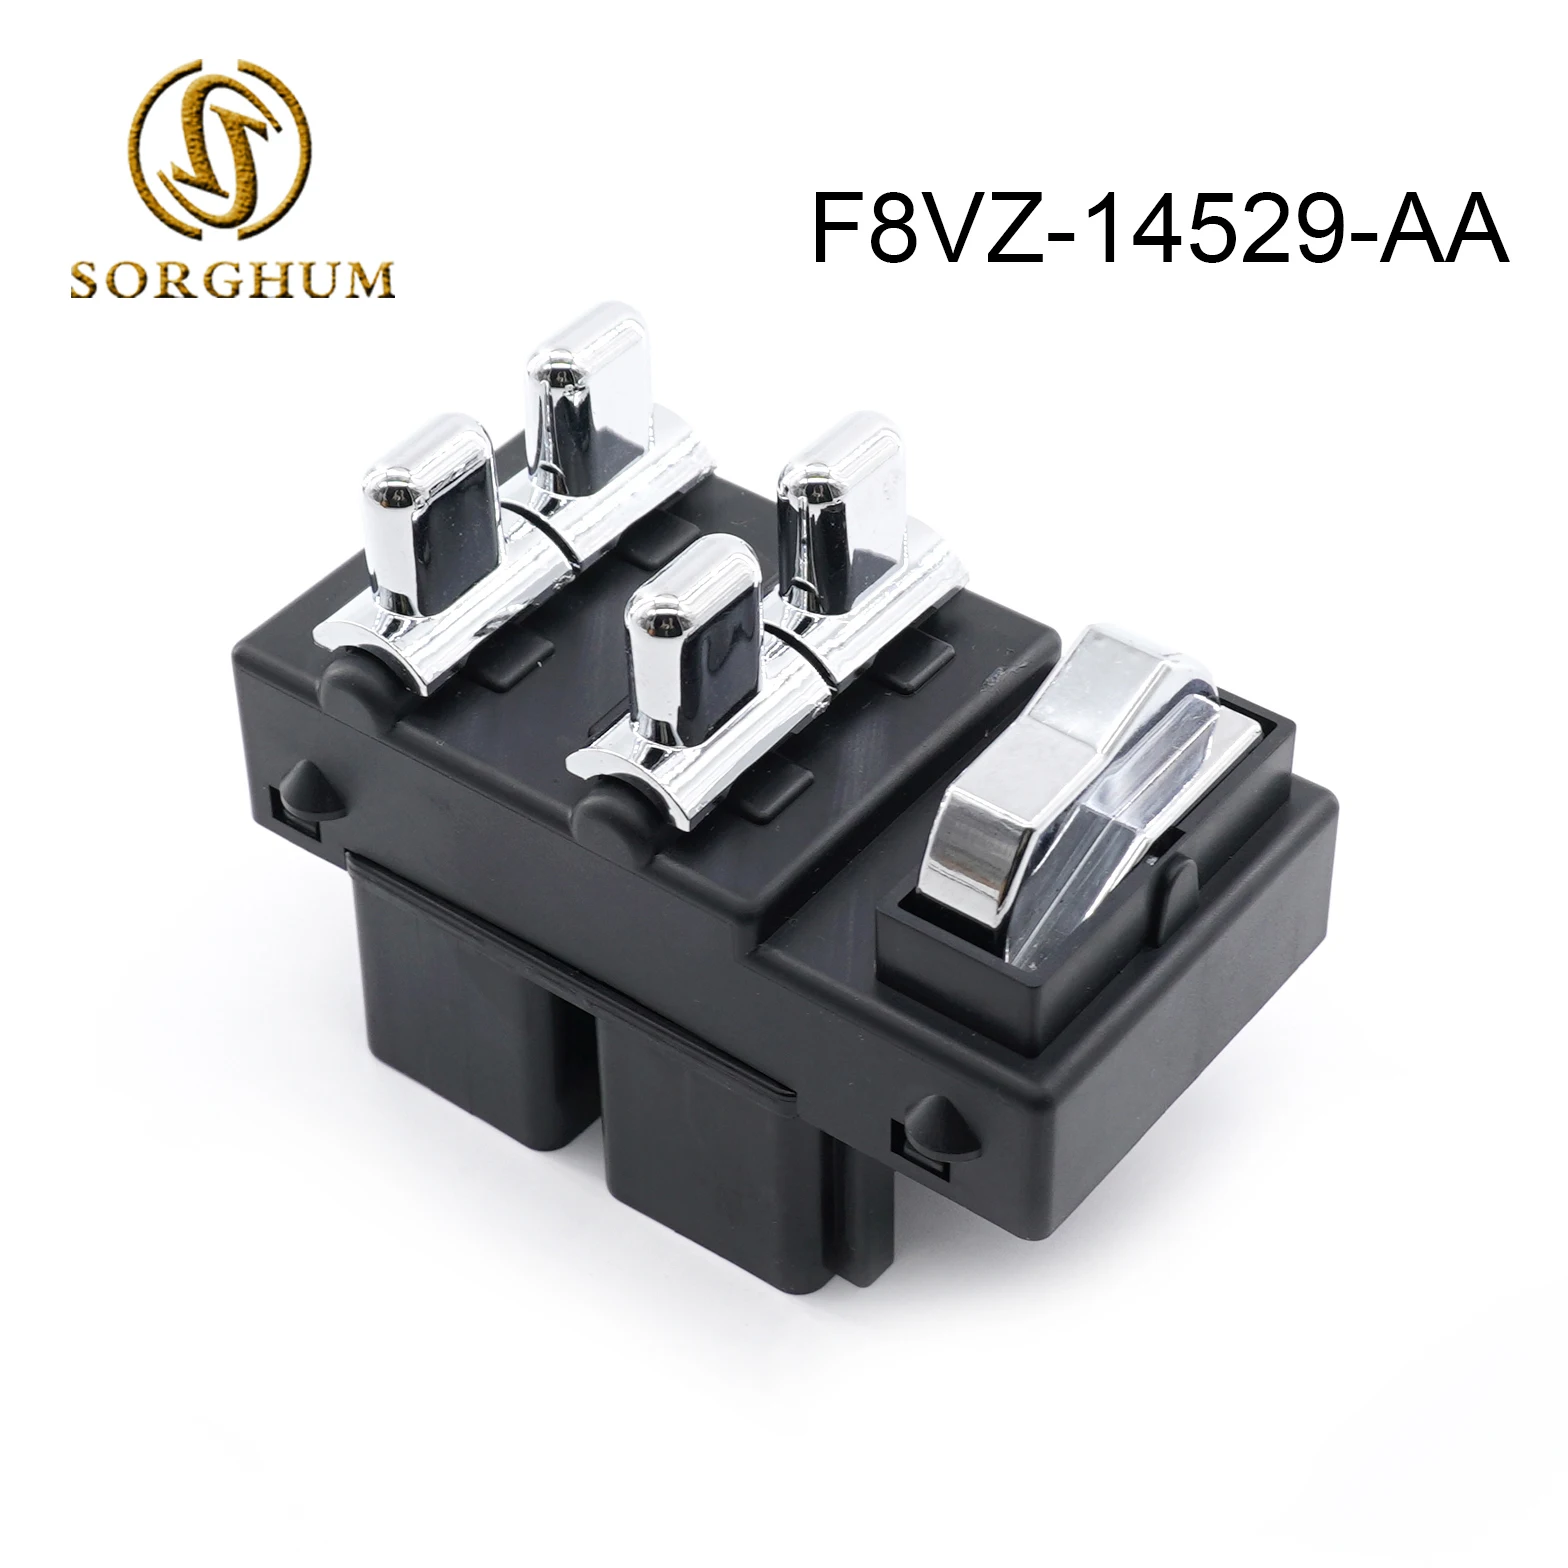 

Sorghum F8VZ-14529-AA F8VZ14529AA New Front Left Electric Power Window Control Switch Regulator For Lincoln Town Car 1998-2002